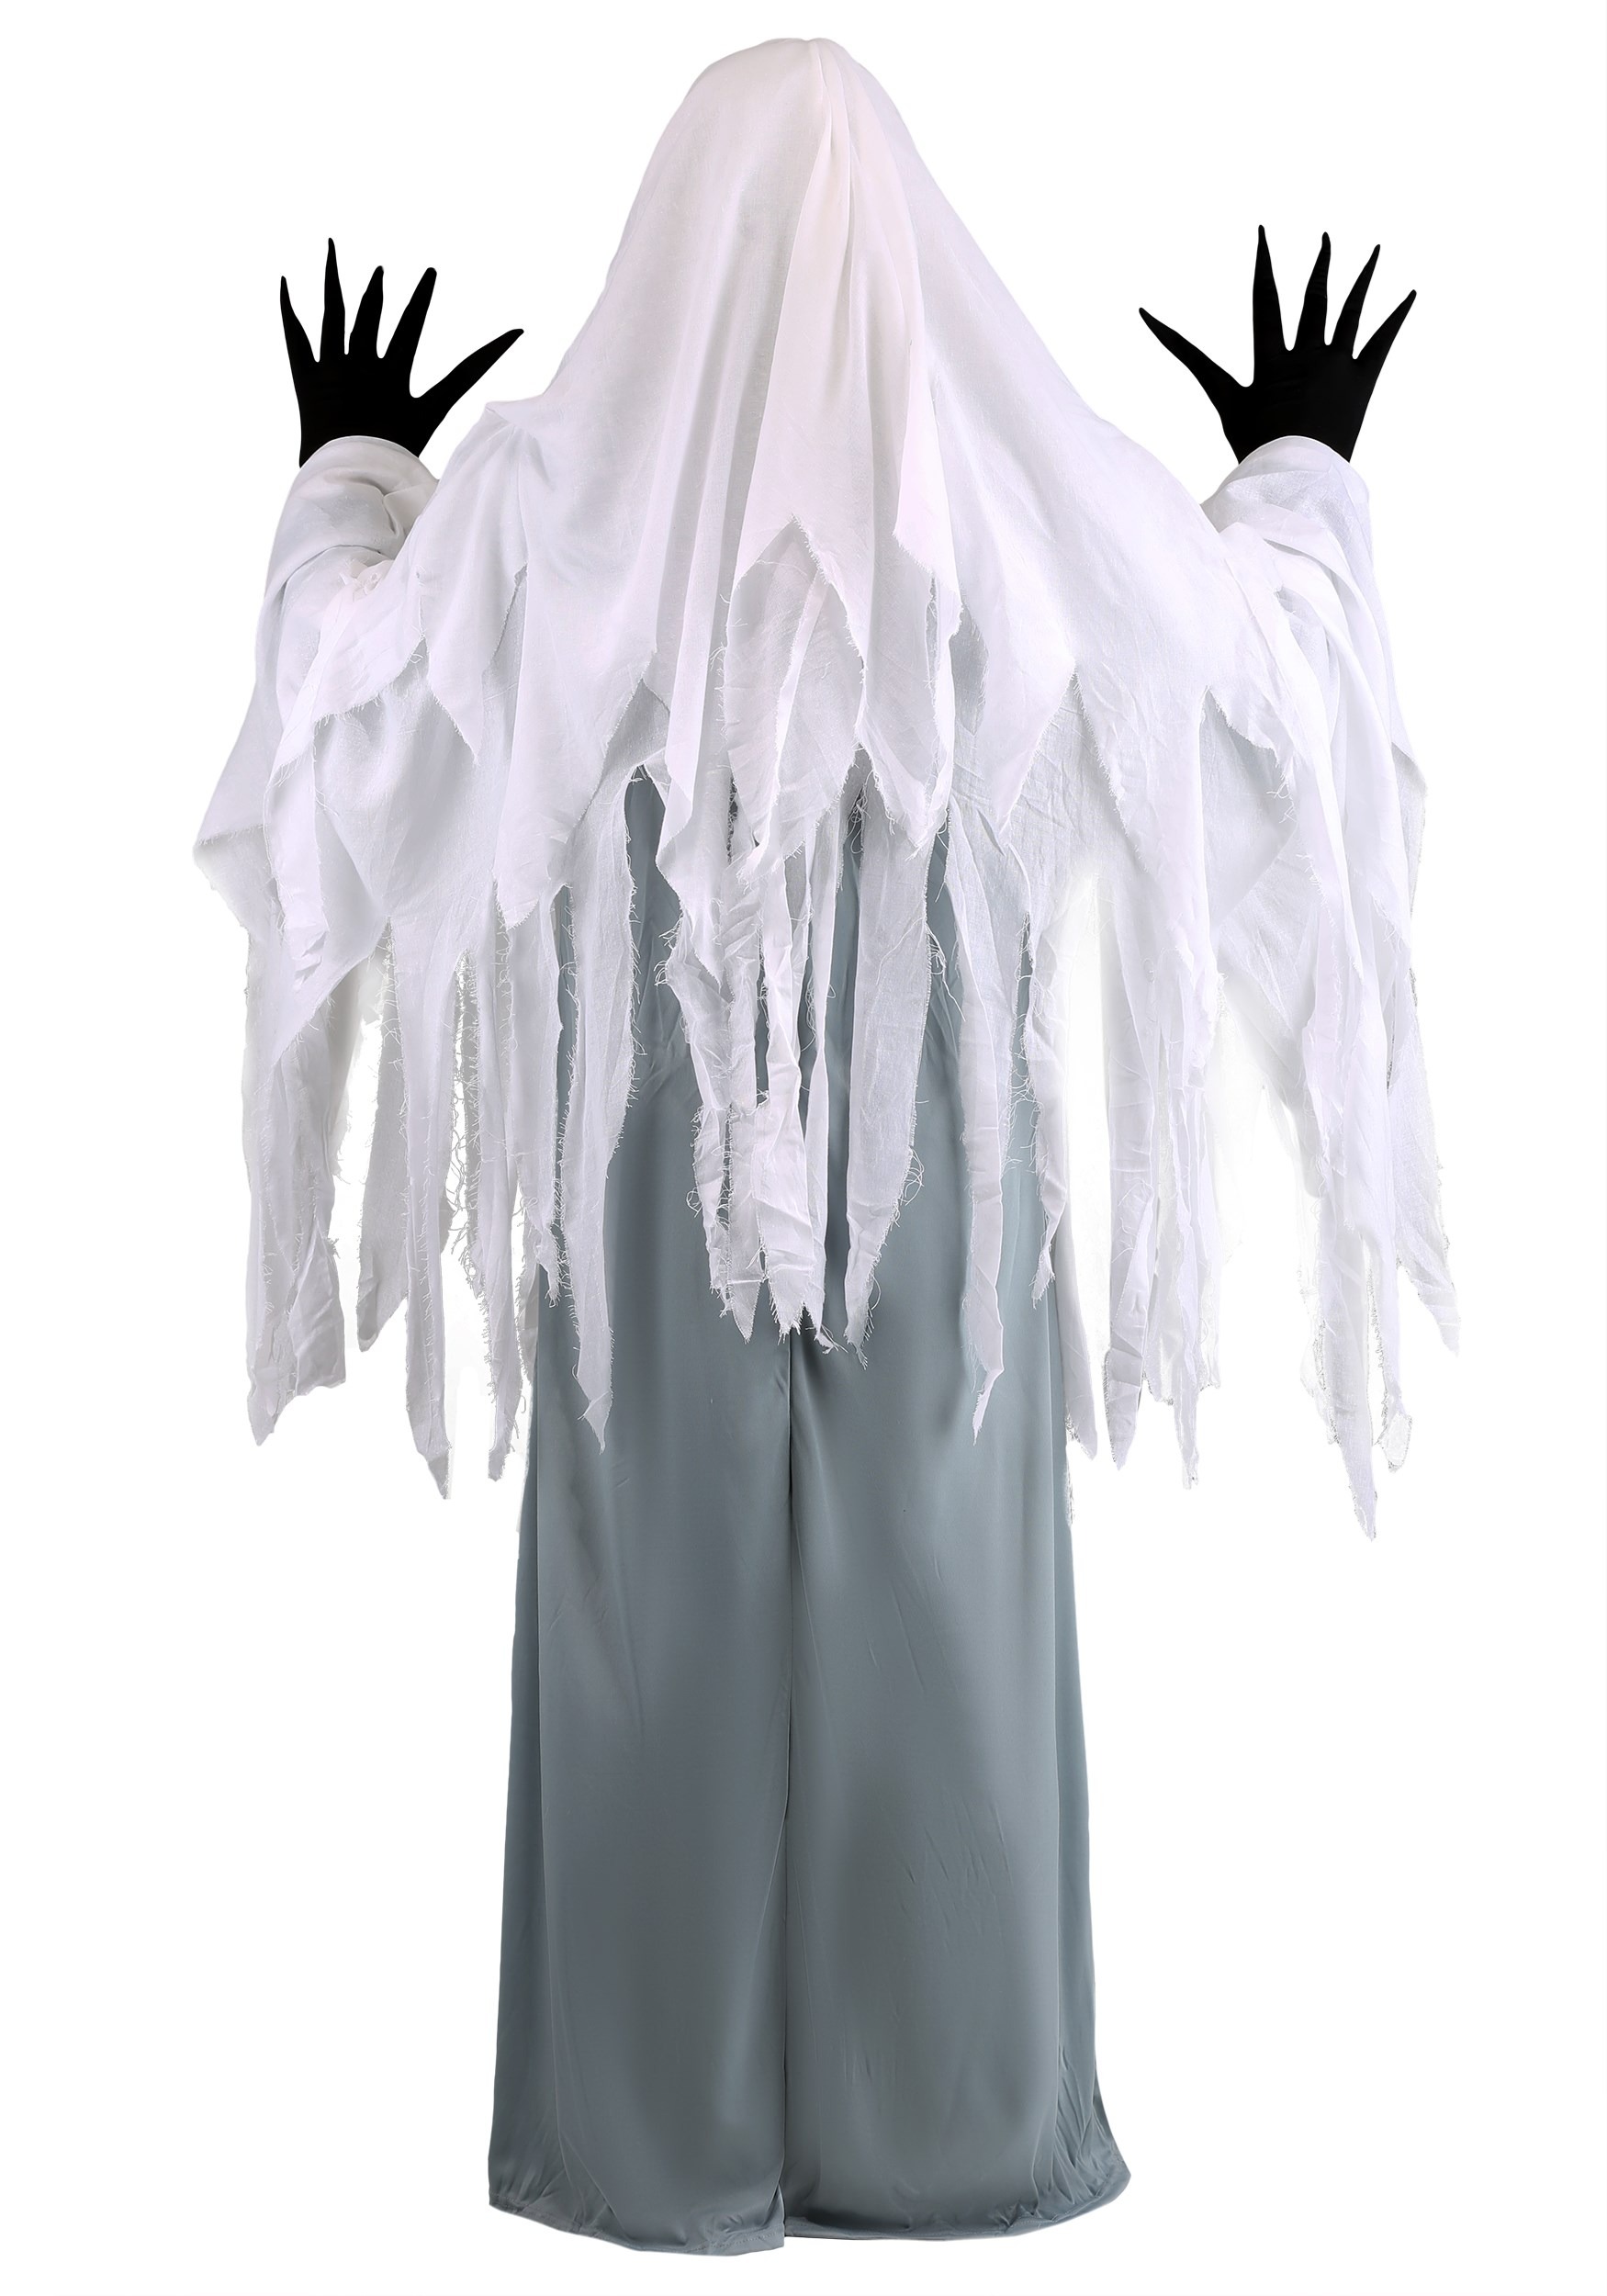 ghost costumes for adults